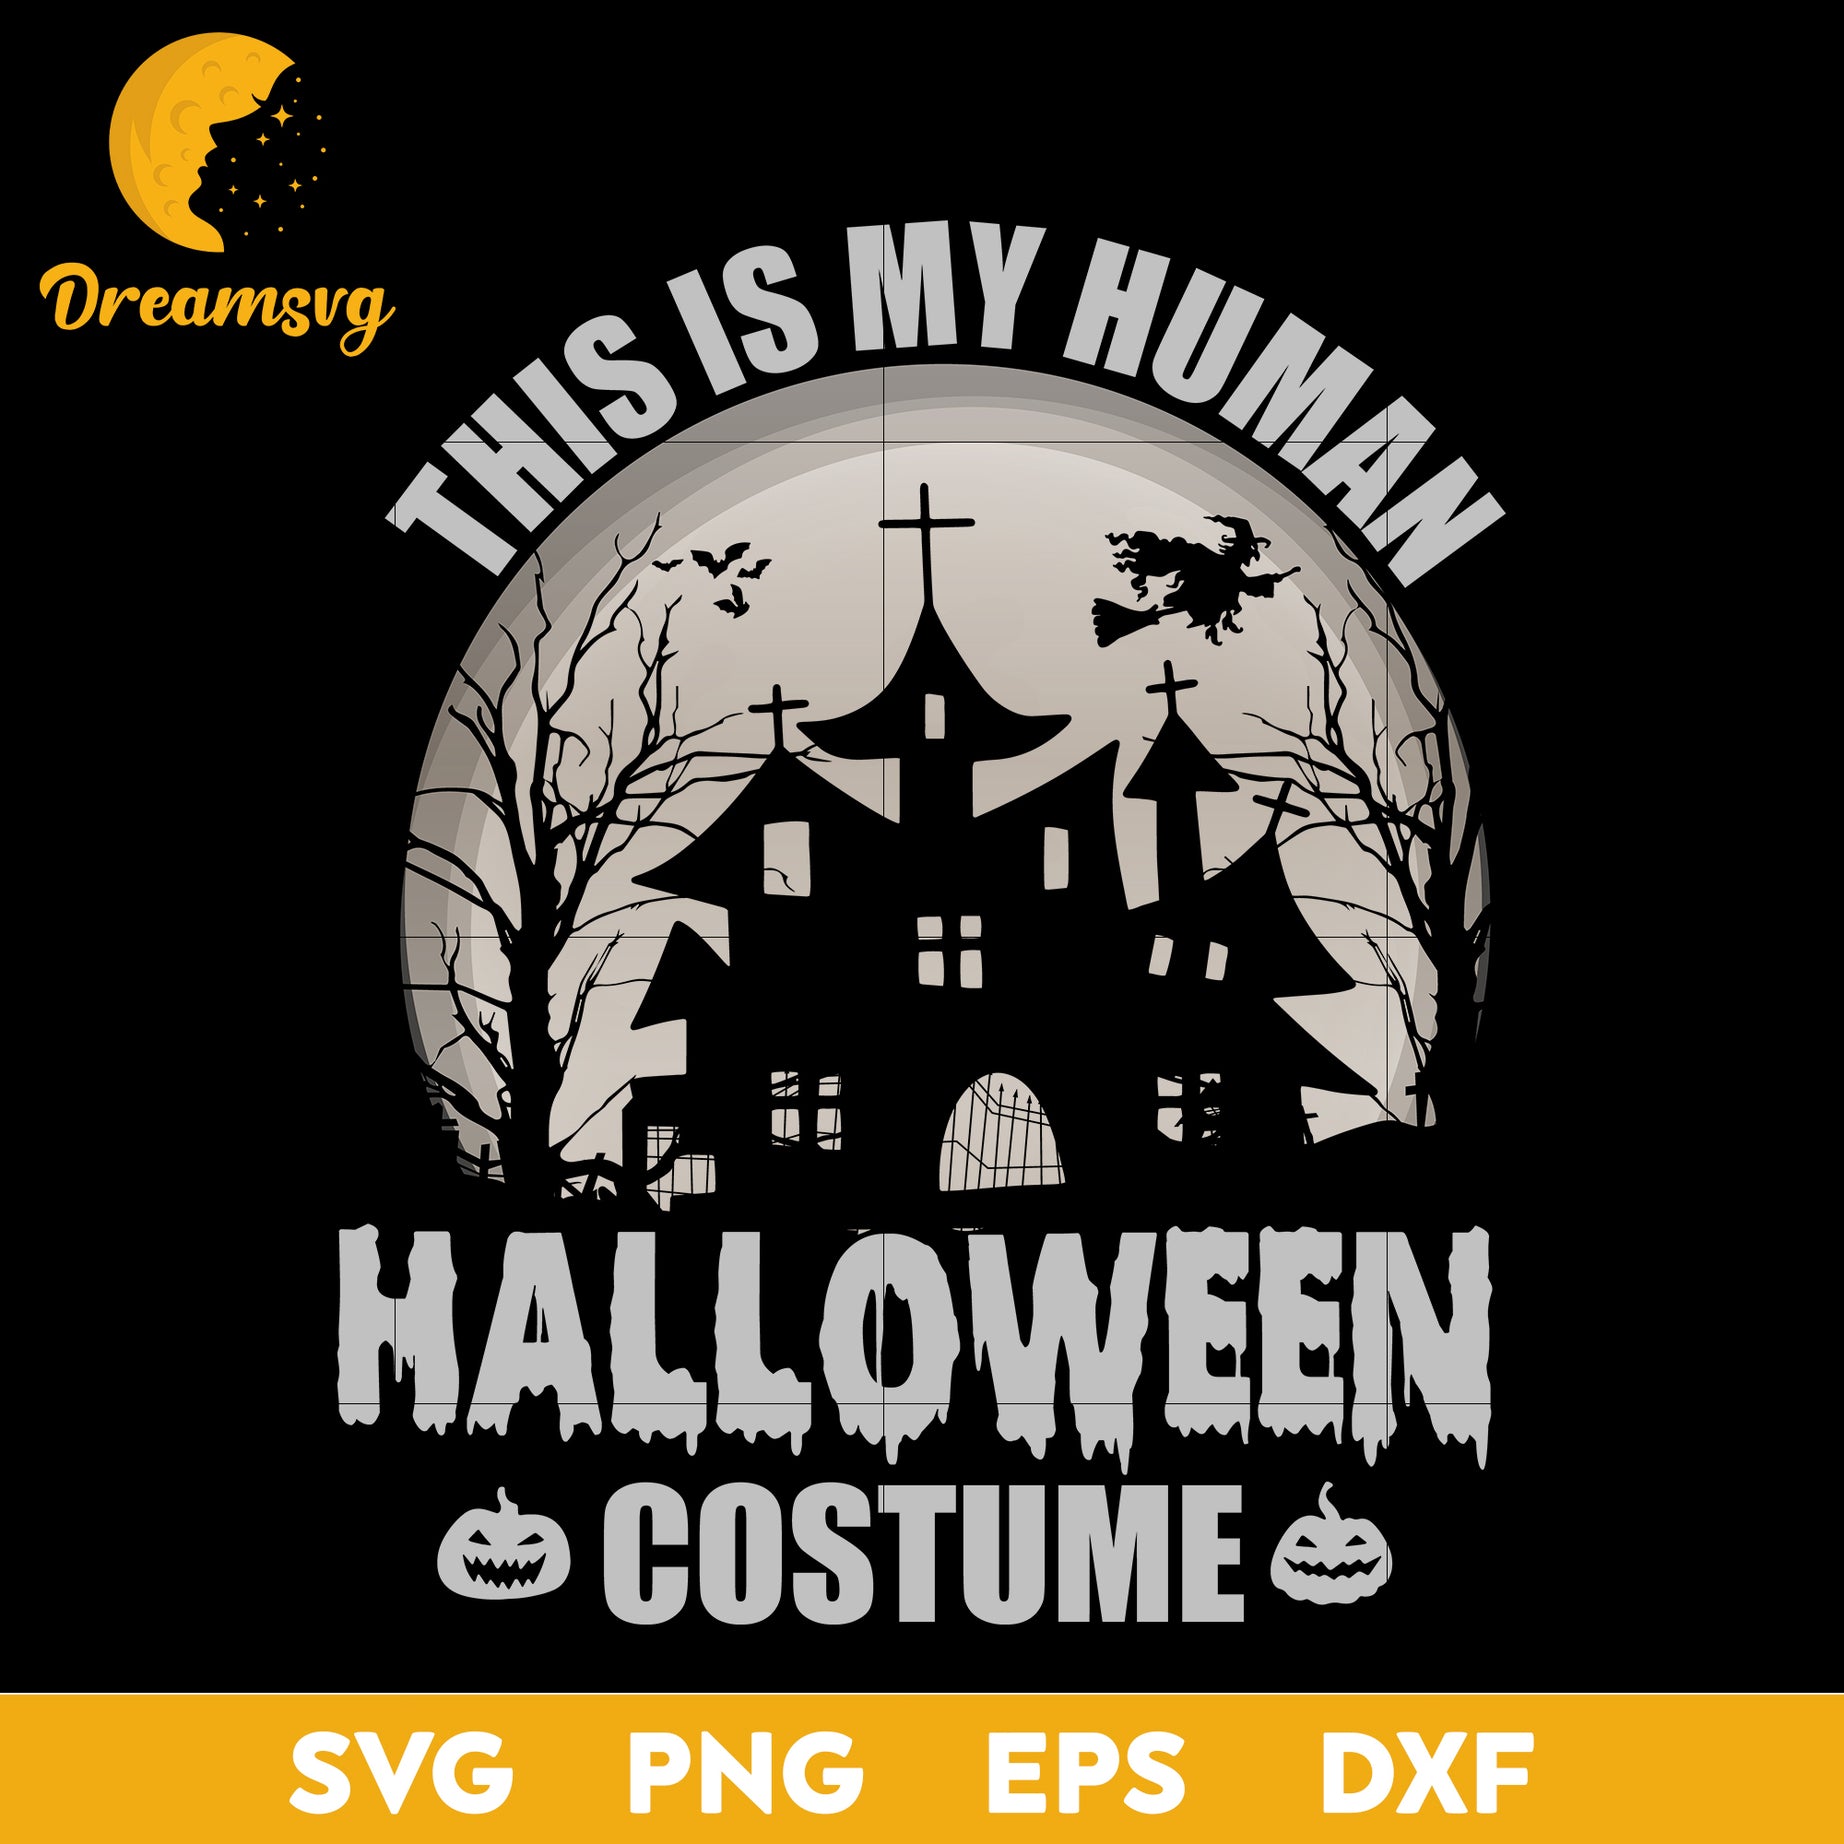 This is my human halloween costume svg, Halloween svg, png, dxf, eps digital file.